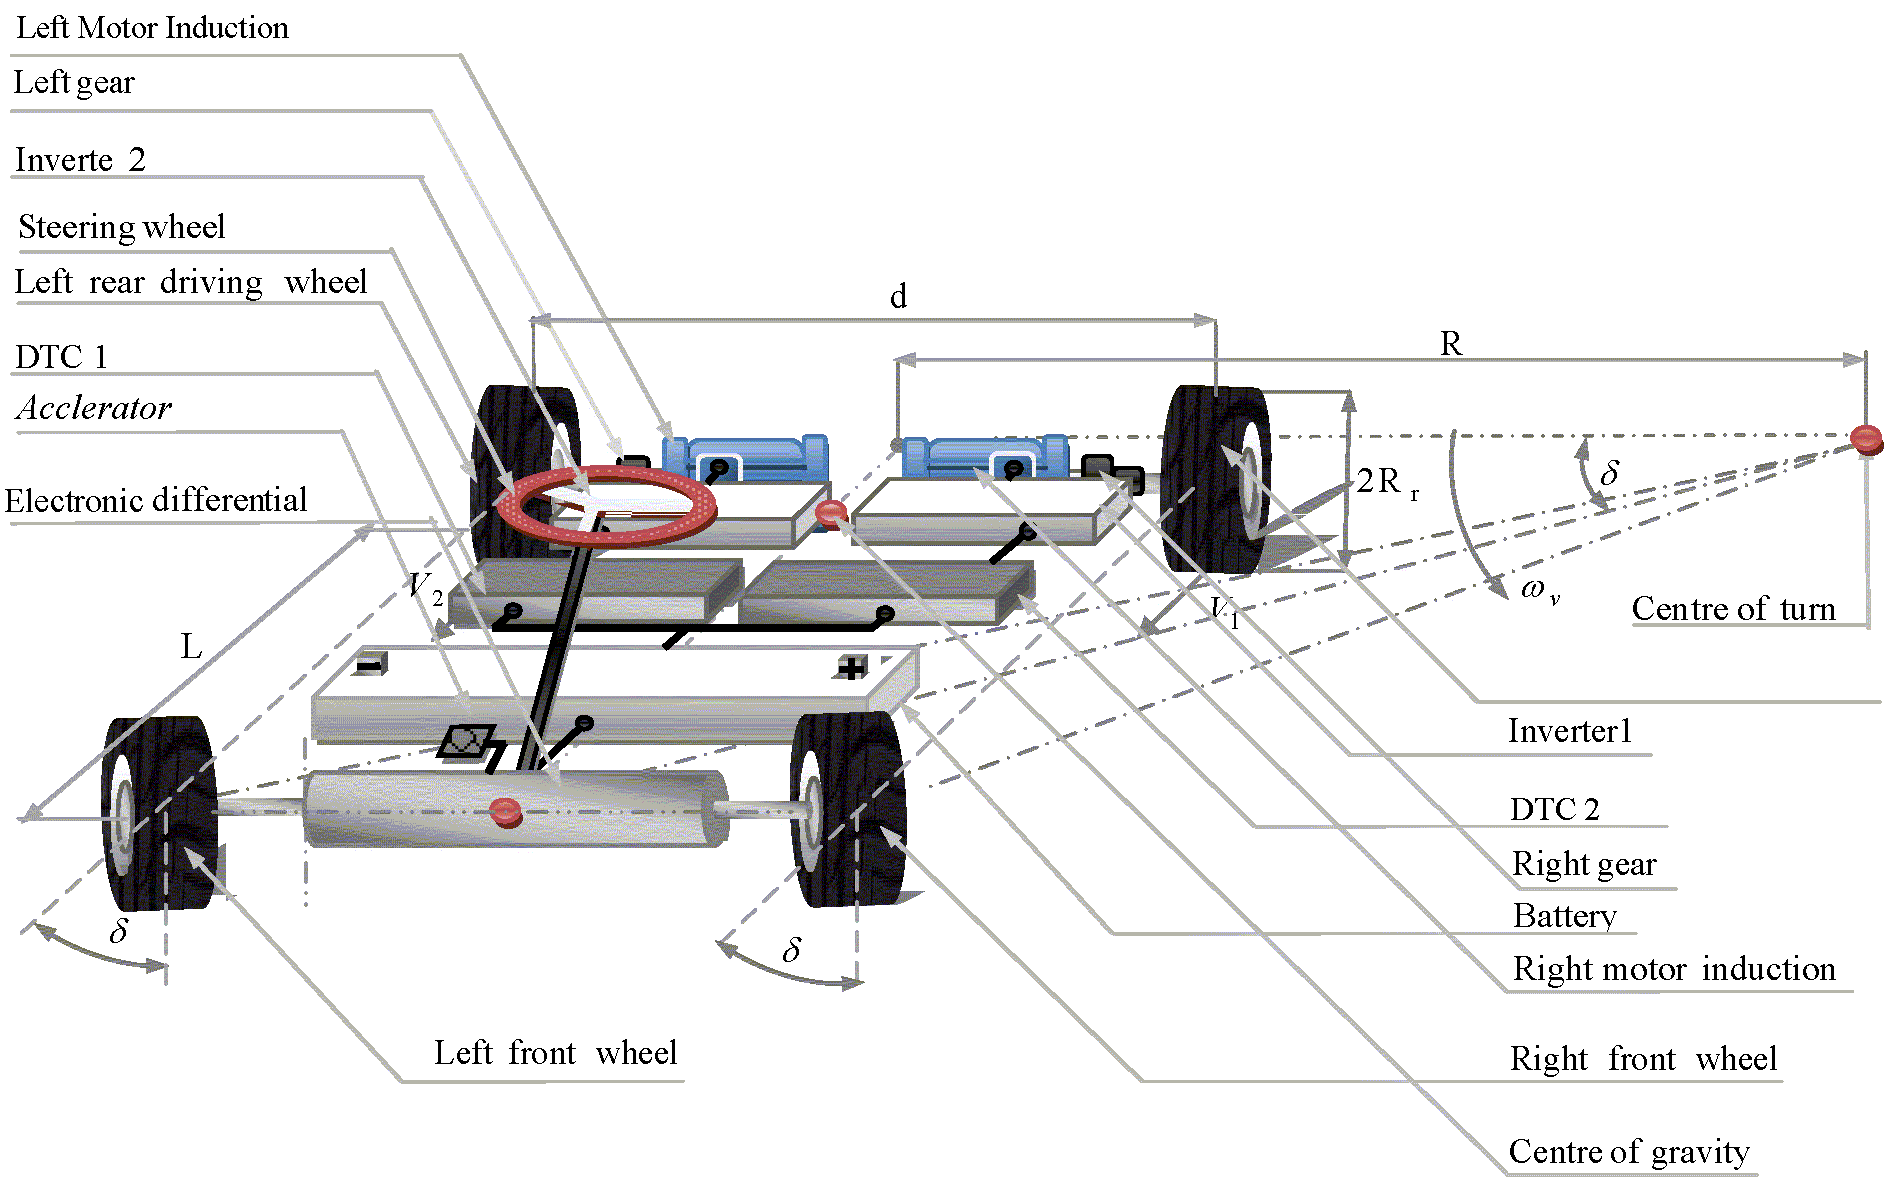 picture taken from "Adaptive Fuzzy PI of Double Wheeled Electric Vehicle Drive Controlled by Direct Torque Control"